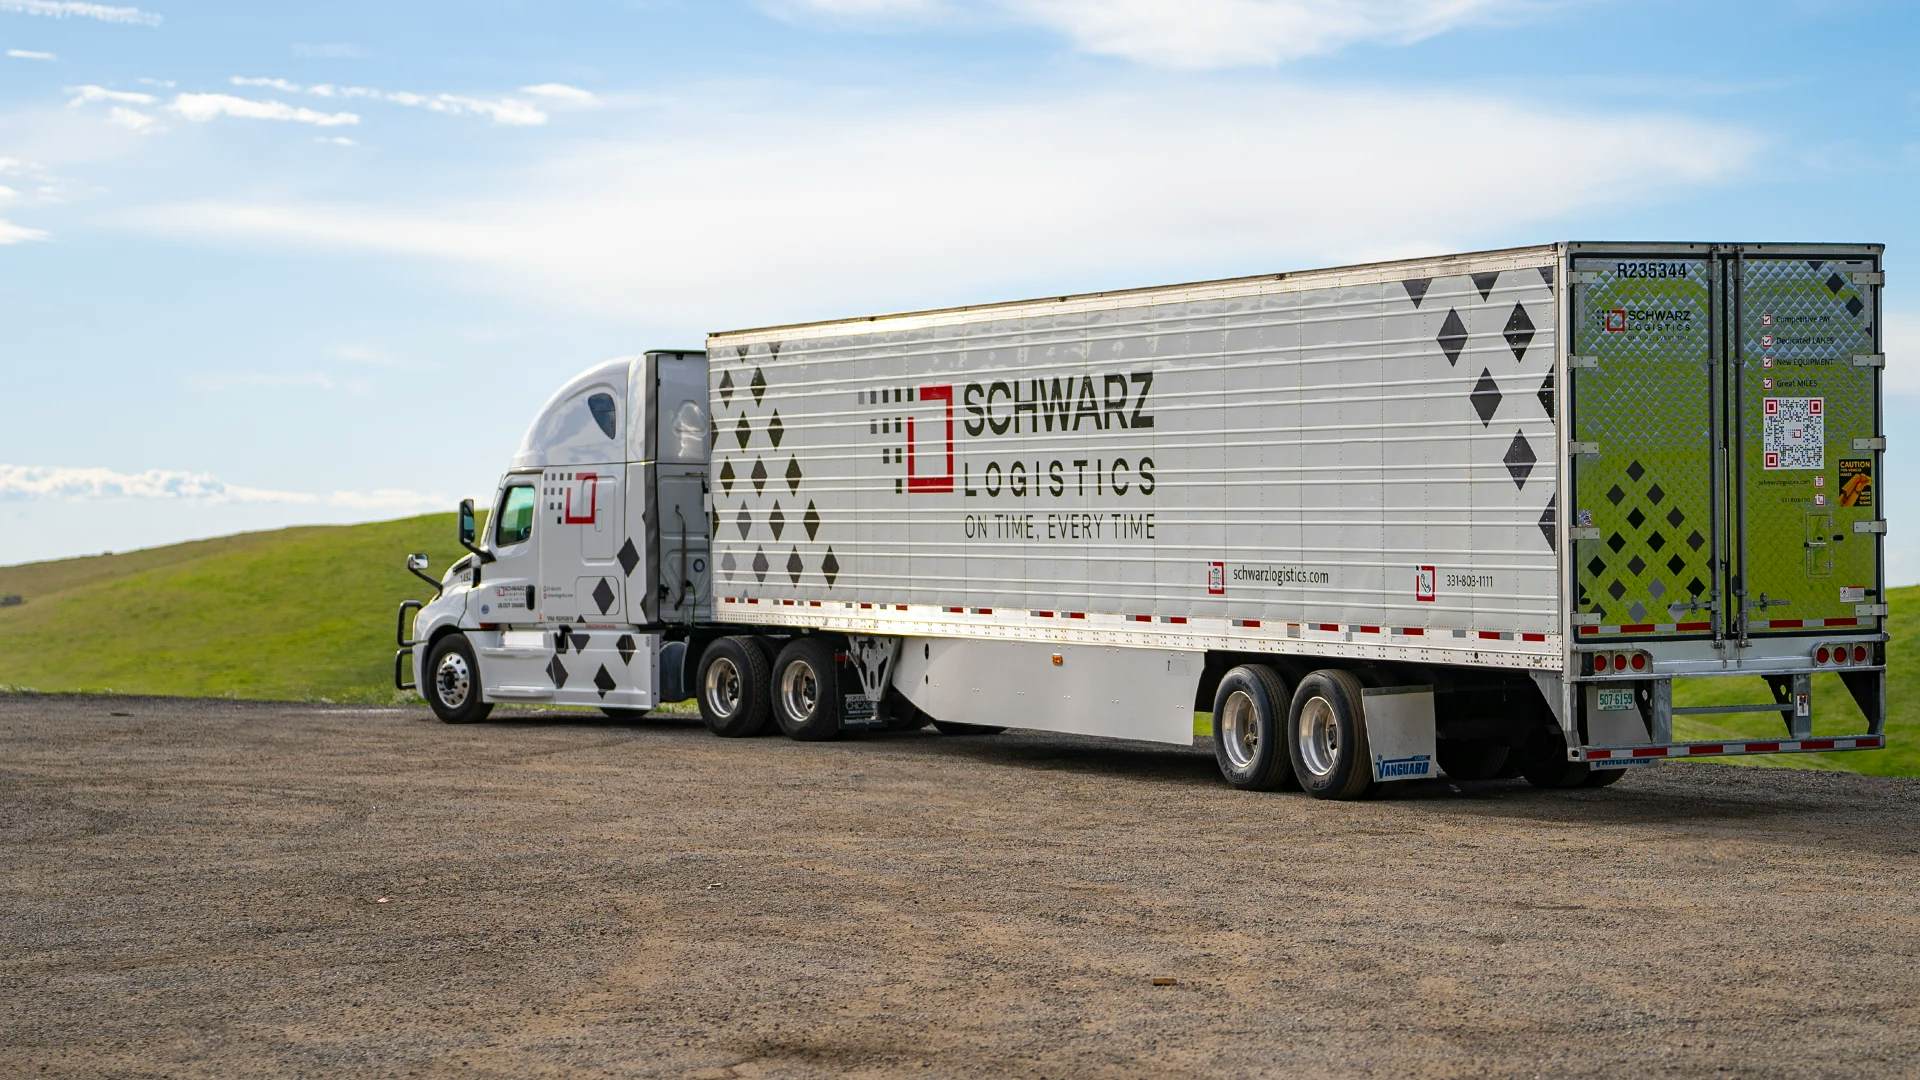 A white semi-truck with a trailer that has the name "SCHWARZ LOGISTICS" printed on the side, along with the tagline "ON TIME, EVERY TIME." The background shows a clear sky with lush green hills, and the truck is parked on a gravel lot.